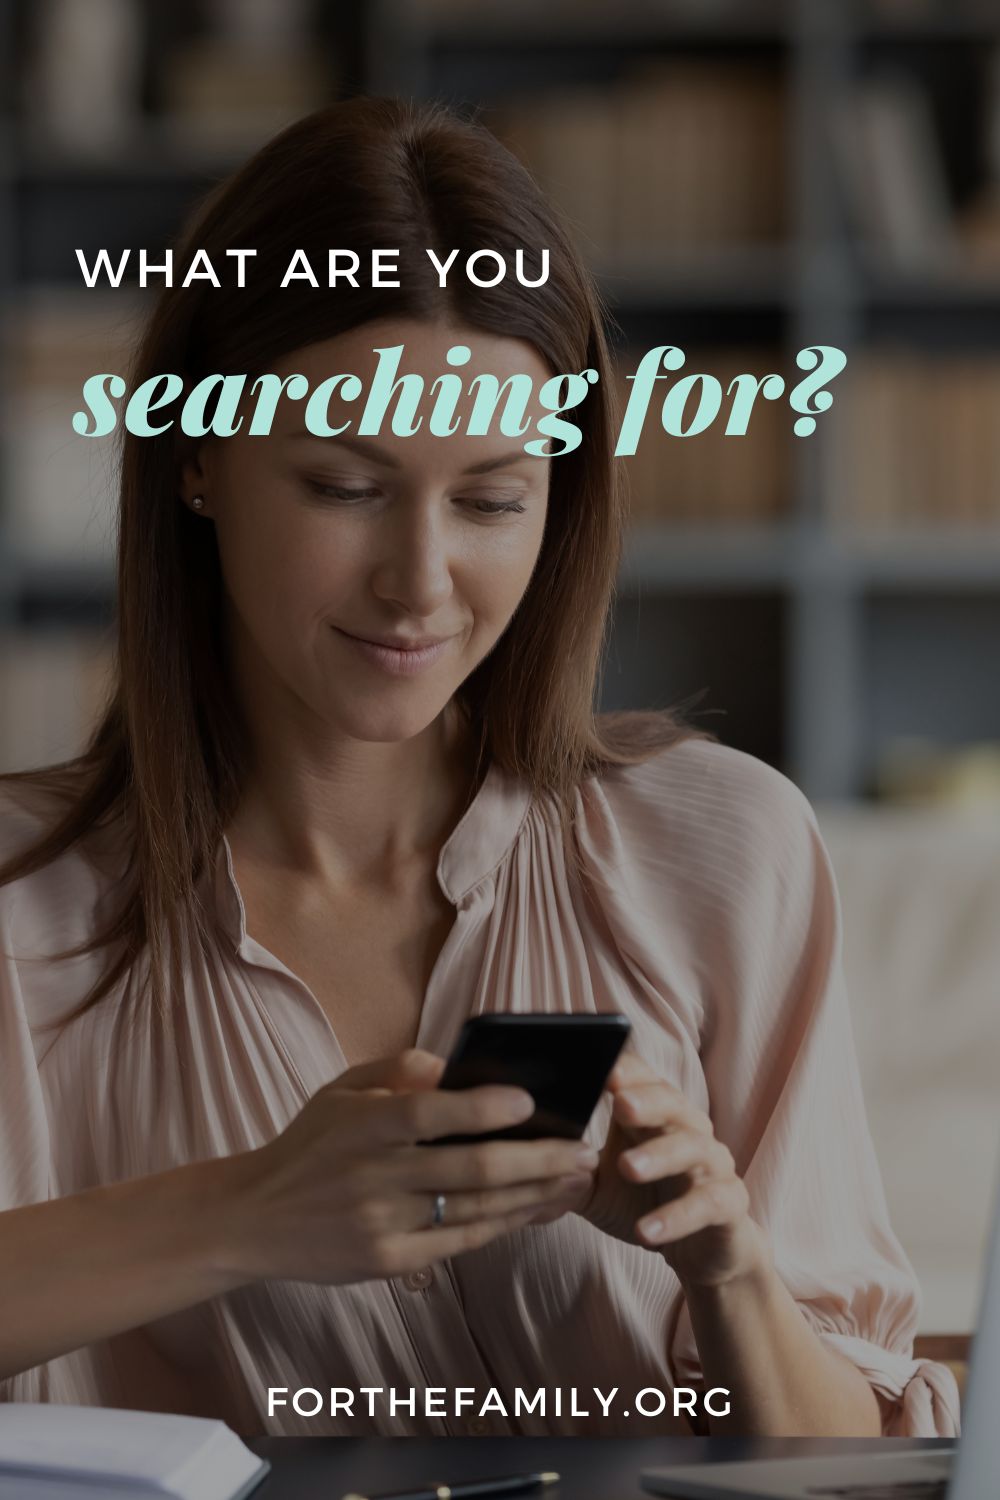 What Are You Searching For?